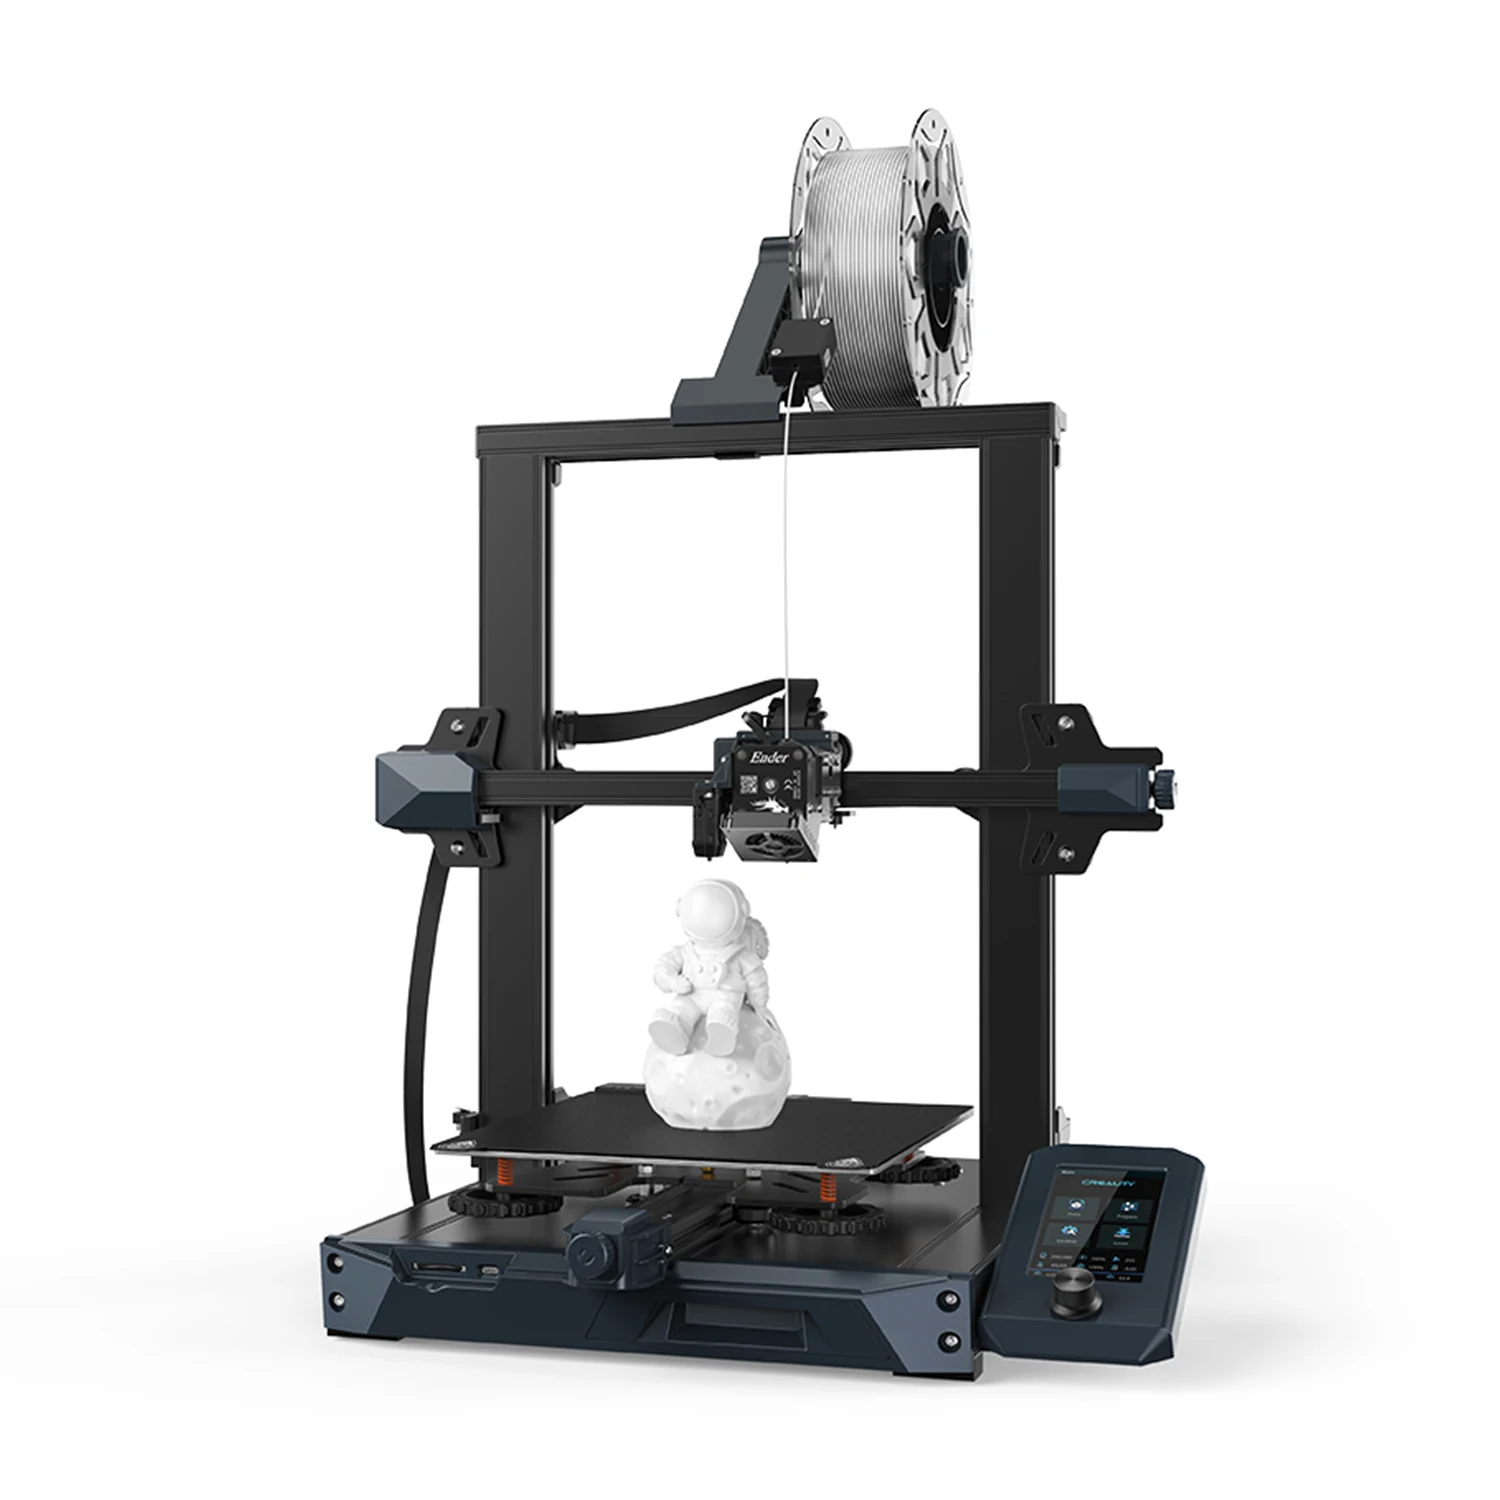 

Creality Ender-3 S1 Desktop 3D Printer FDM 3D Printing 220*220*270mm/8.6*8.6*10.6in Build Size with Direct Extruder for PLA/TPU